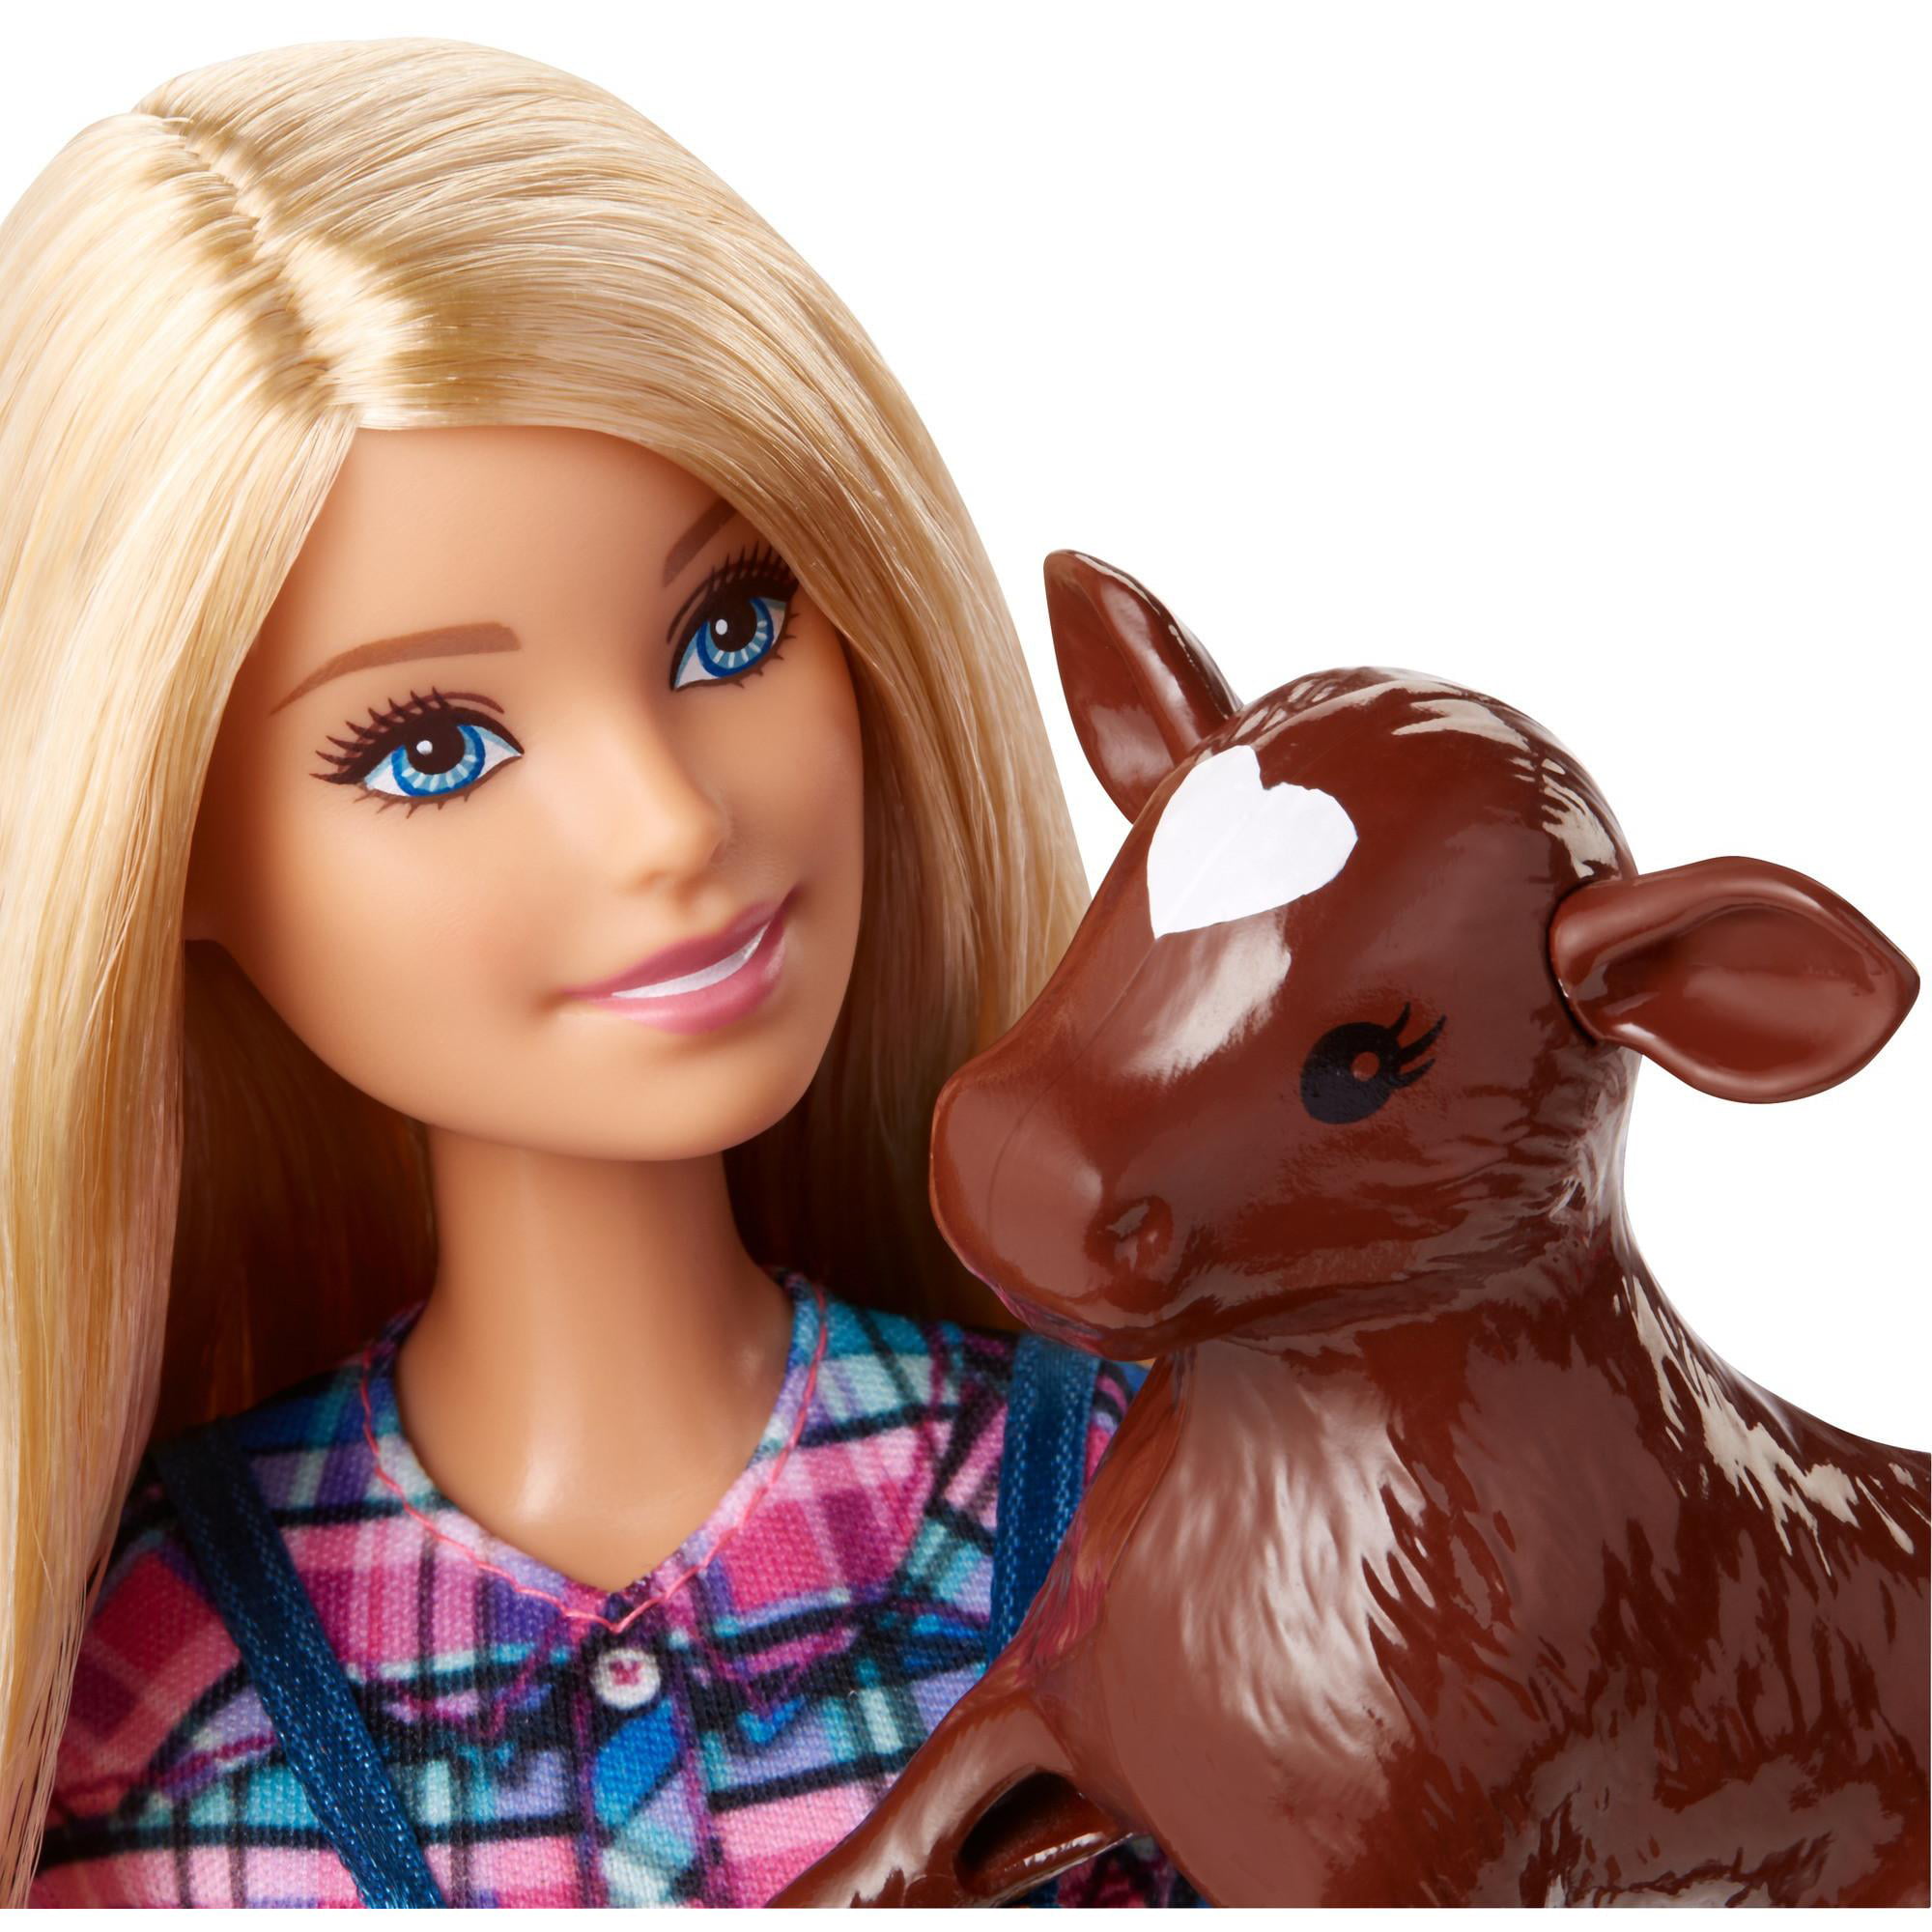 Barbie Careers Farmer Doll and with Themed Accessories -